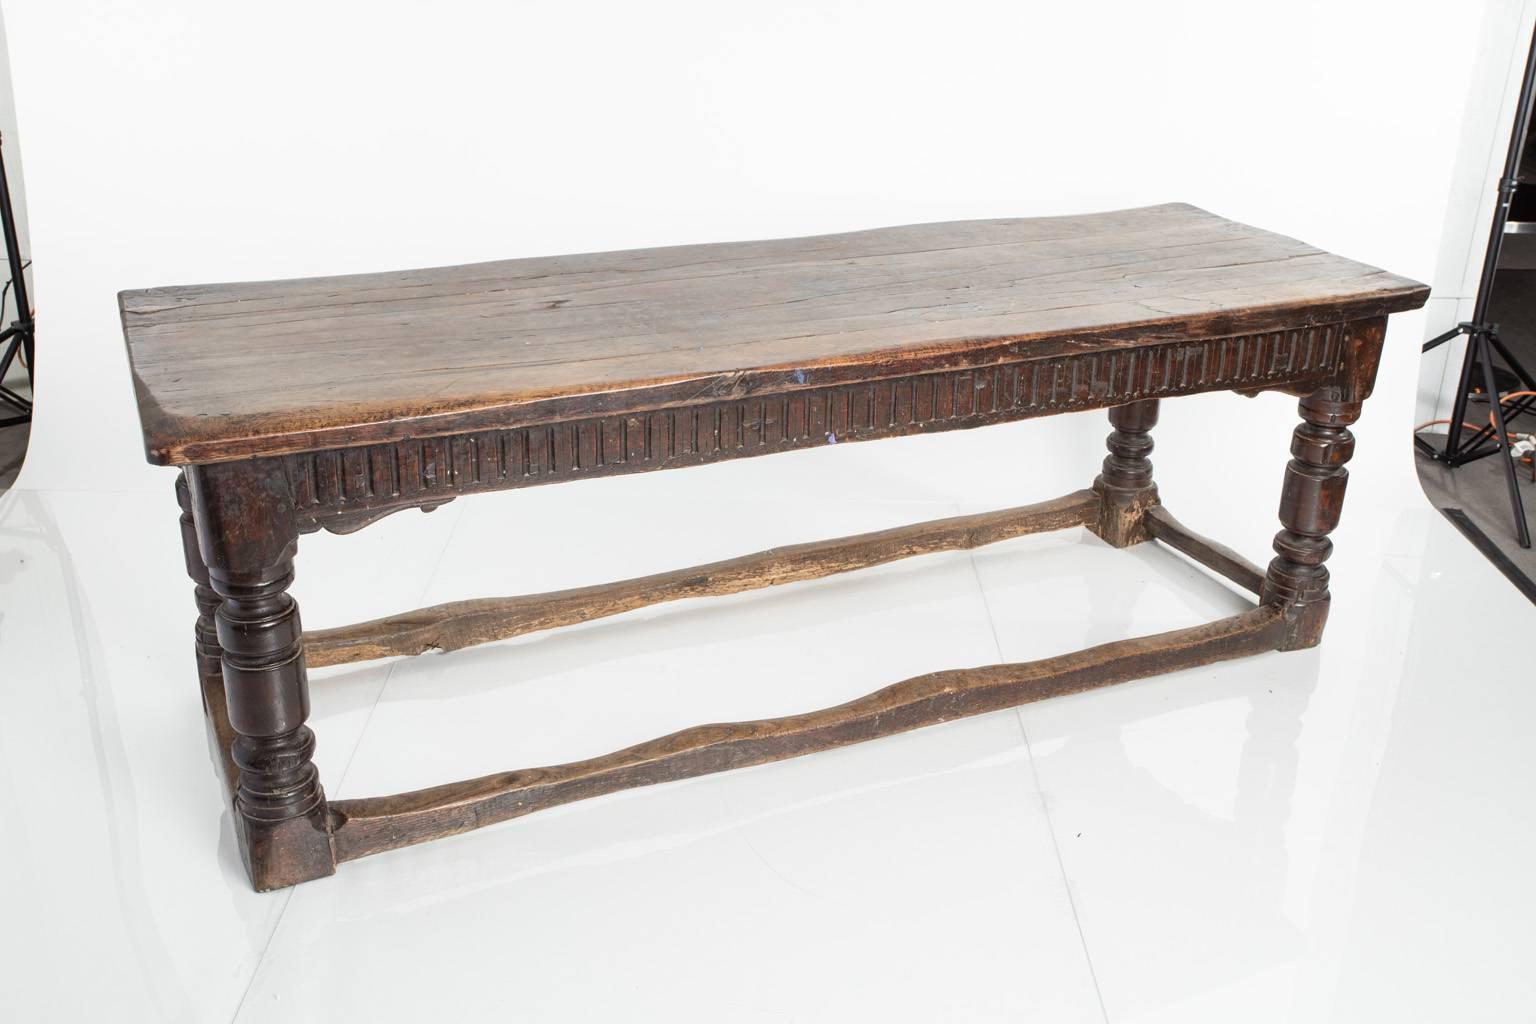 18th century Jacobean style trestle table, oak, with ring turned legs joined by a lower stretcher.